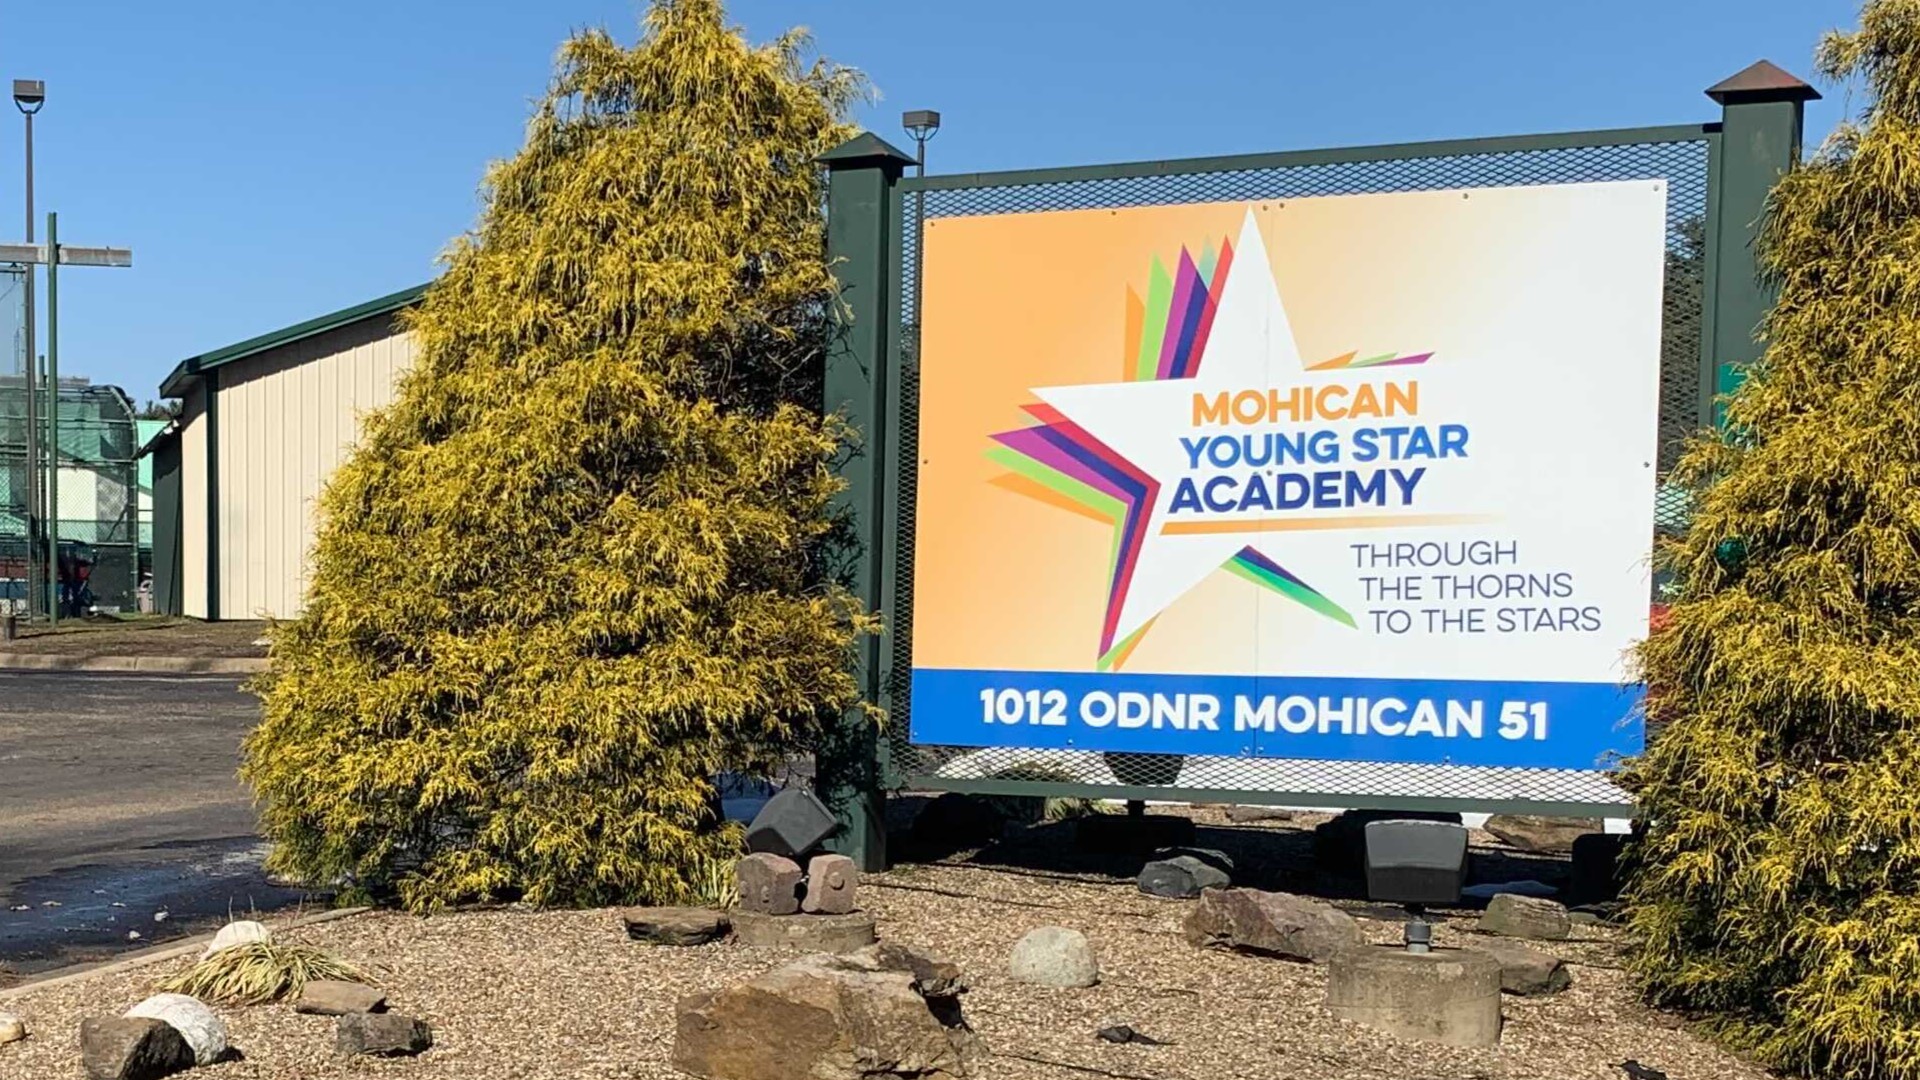 An Ashland County judge tossed out a lawsuit against Mohican Young Star Academy, but Ohio AG Dave Yost plans to move forward in revoking the facility's license.